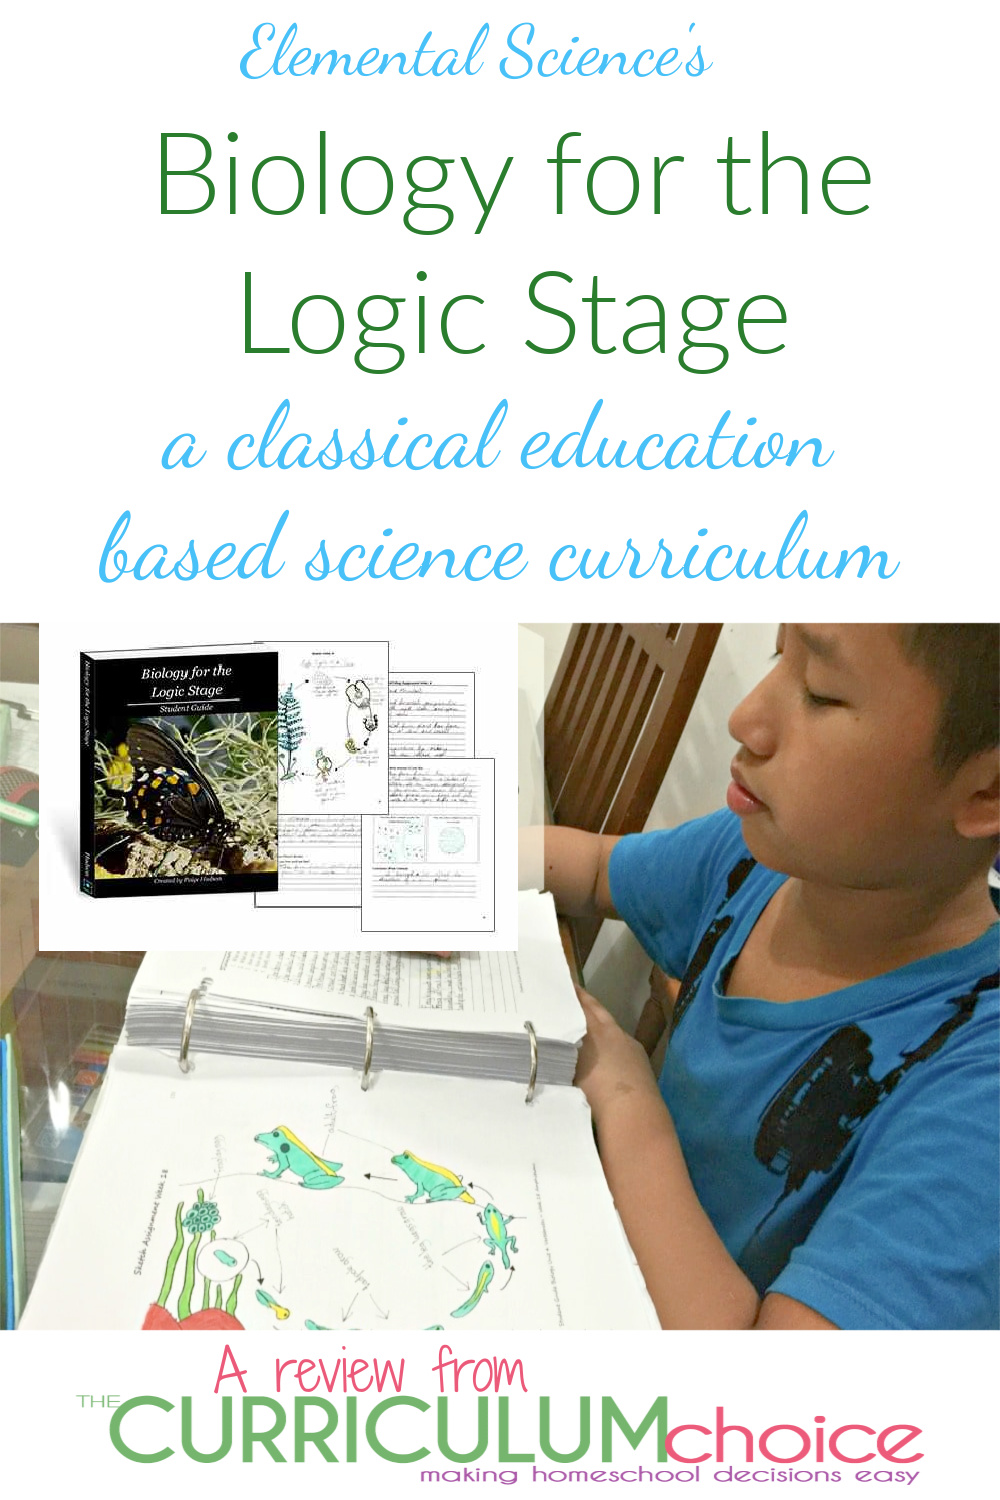 Elemental Science's Biology for The Logic Stage is a 36 week classical science curriculum covering the study of plants, animal life, and the human body. A review from The Curriculum Choice